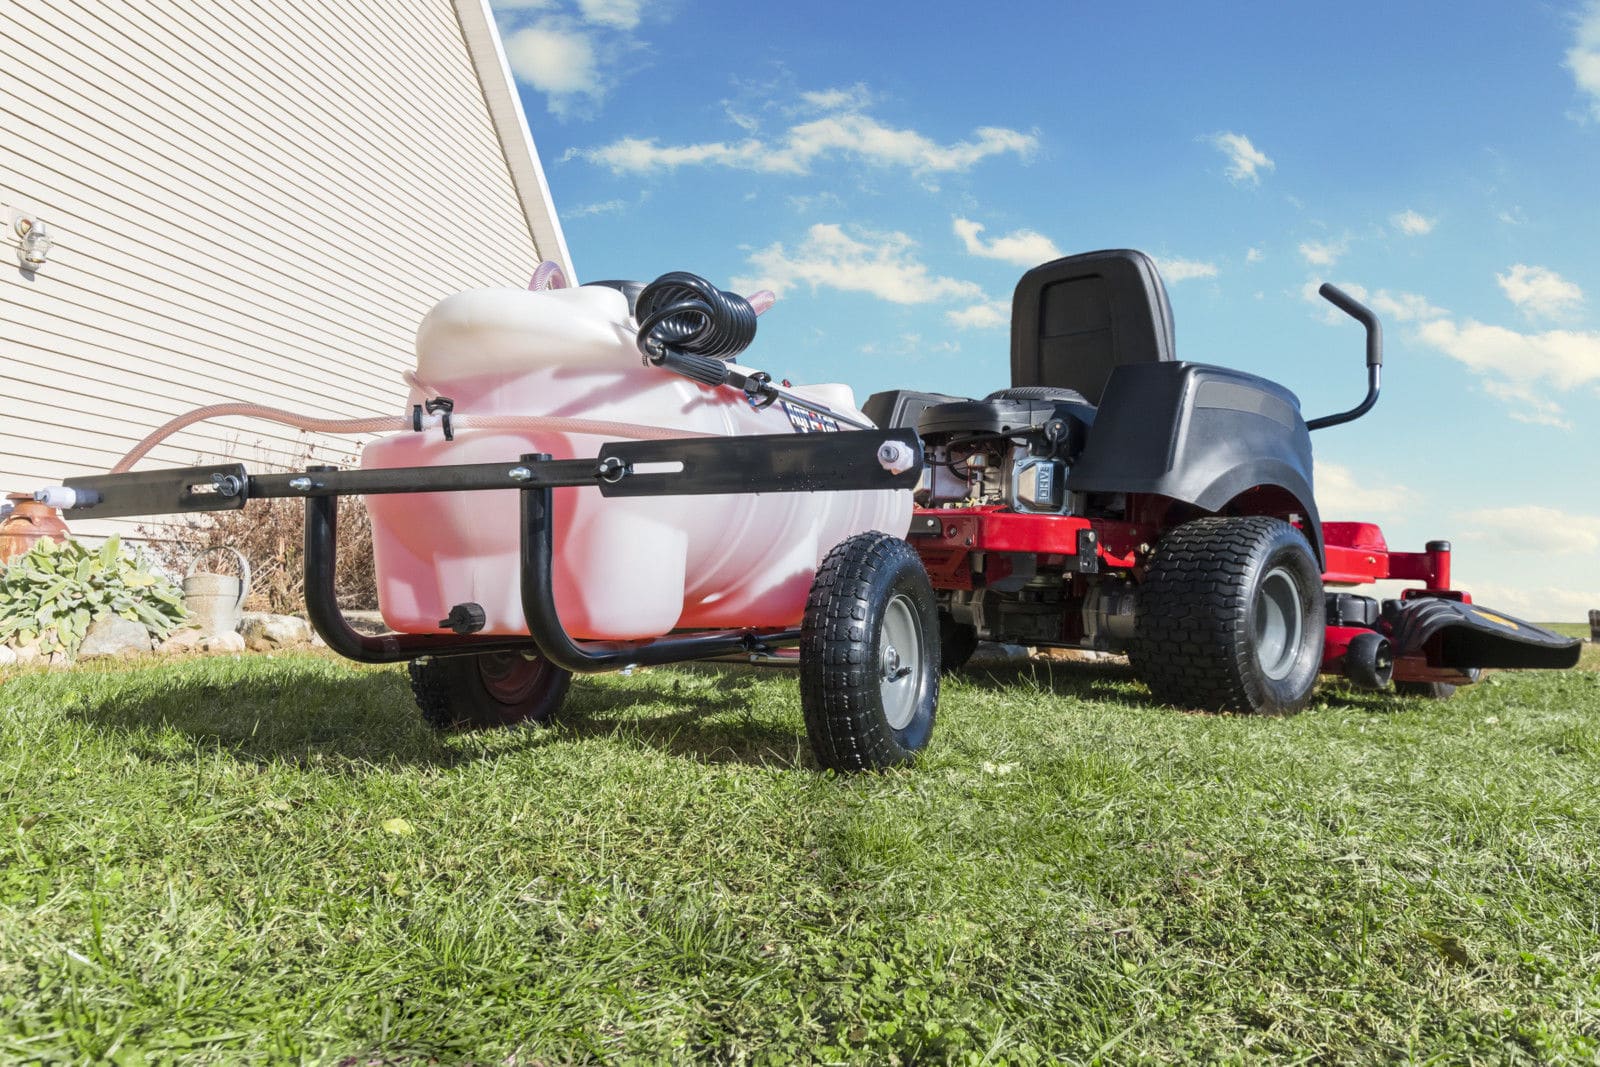 7 Best Tow Behind Sprayers - Relaxing Way To Work! (Fall 2022)